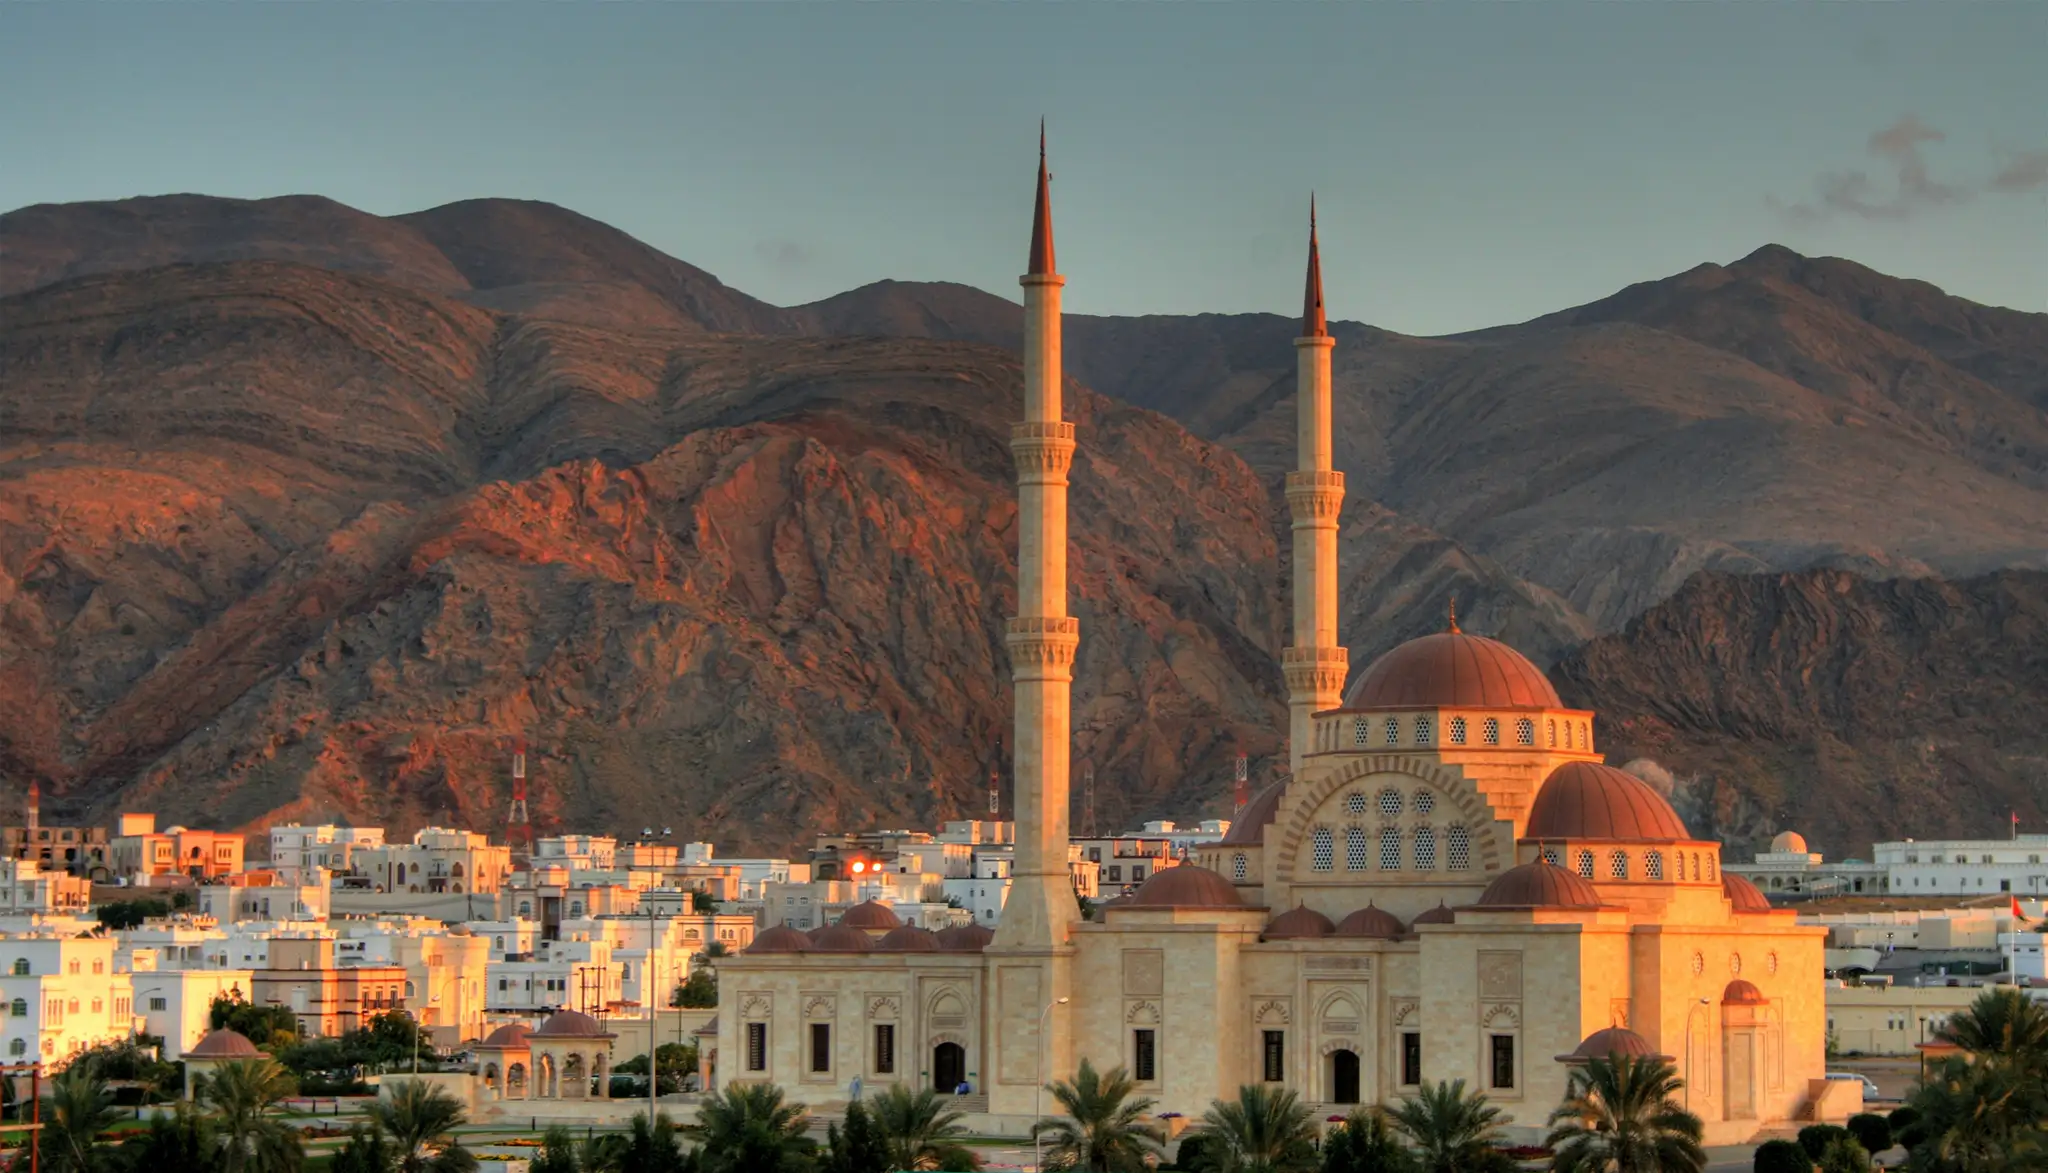 Mosque with two minarets in Muscat, Oman.